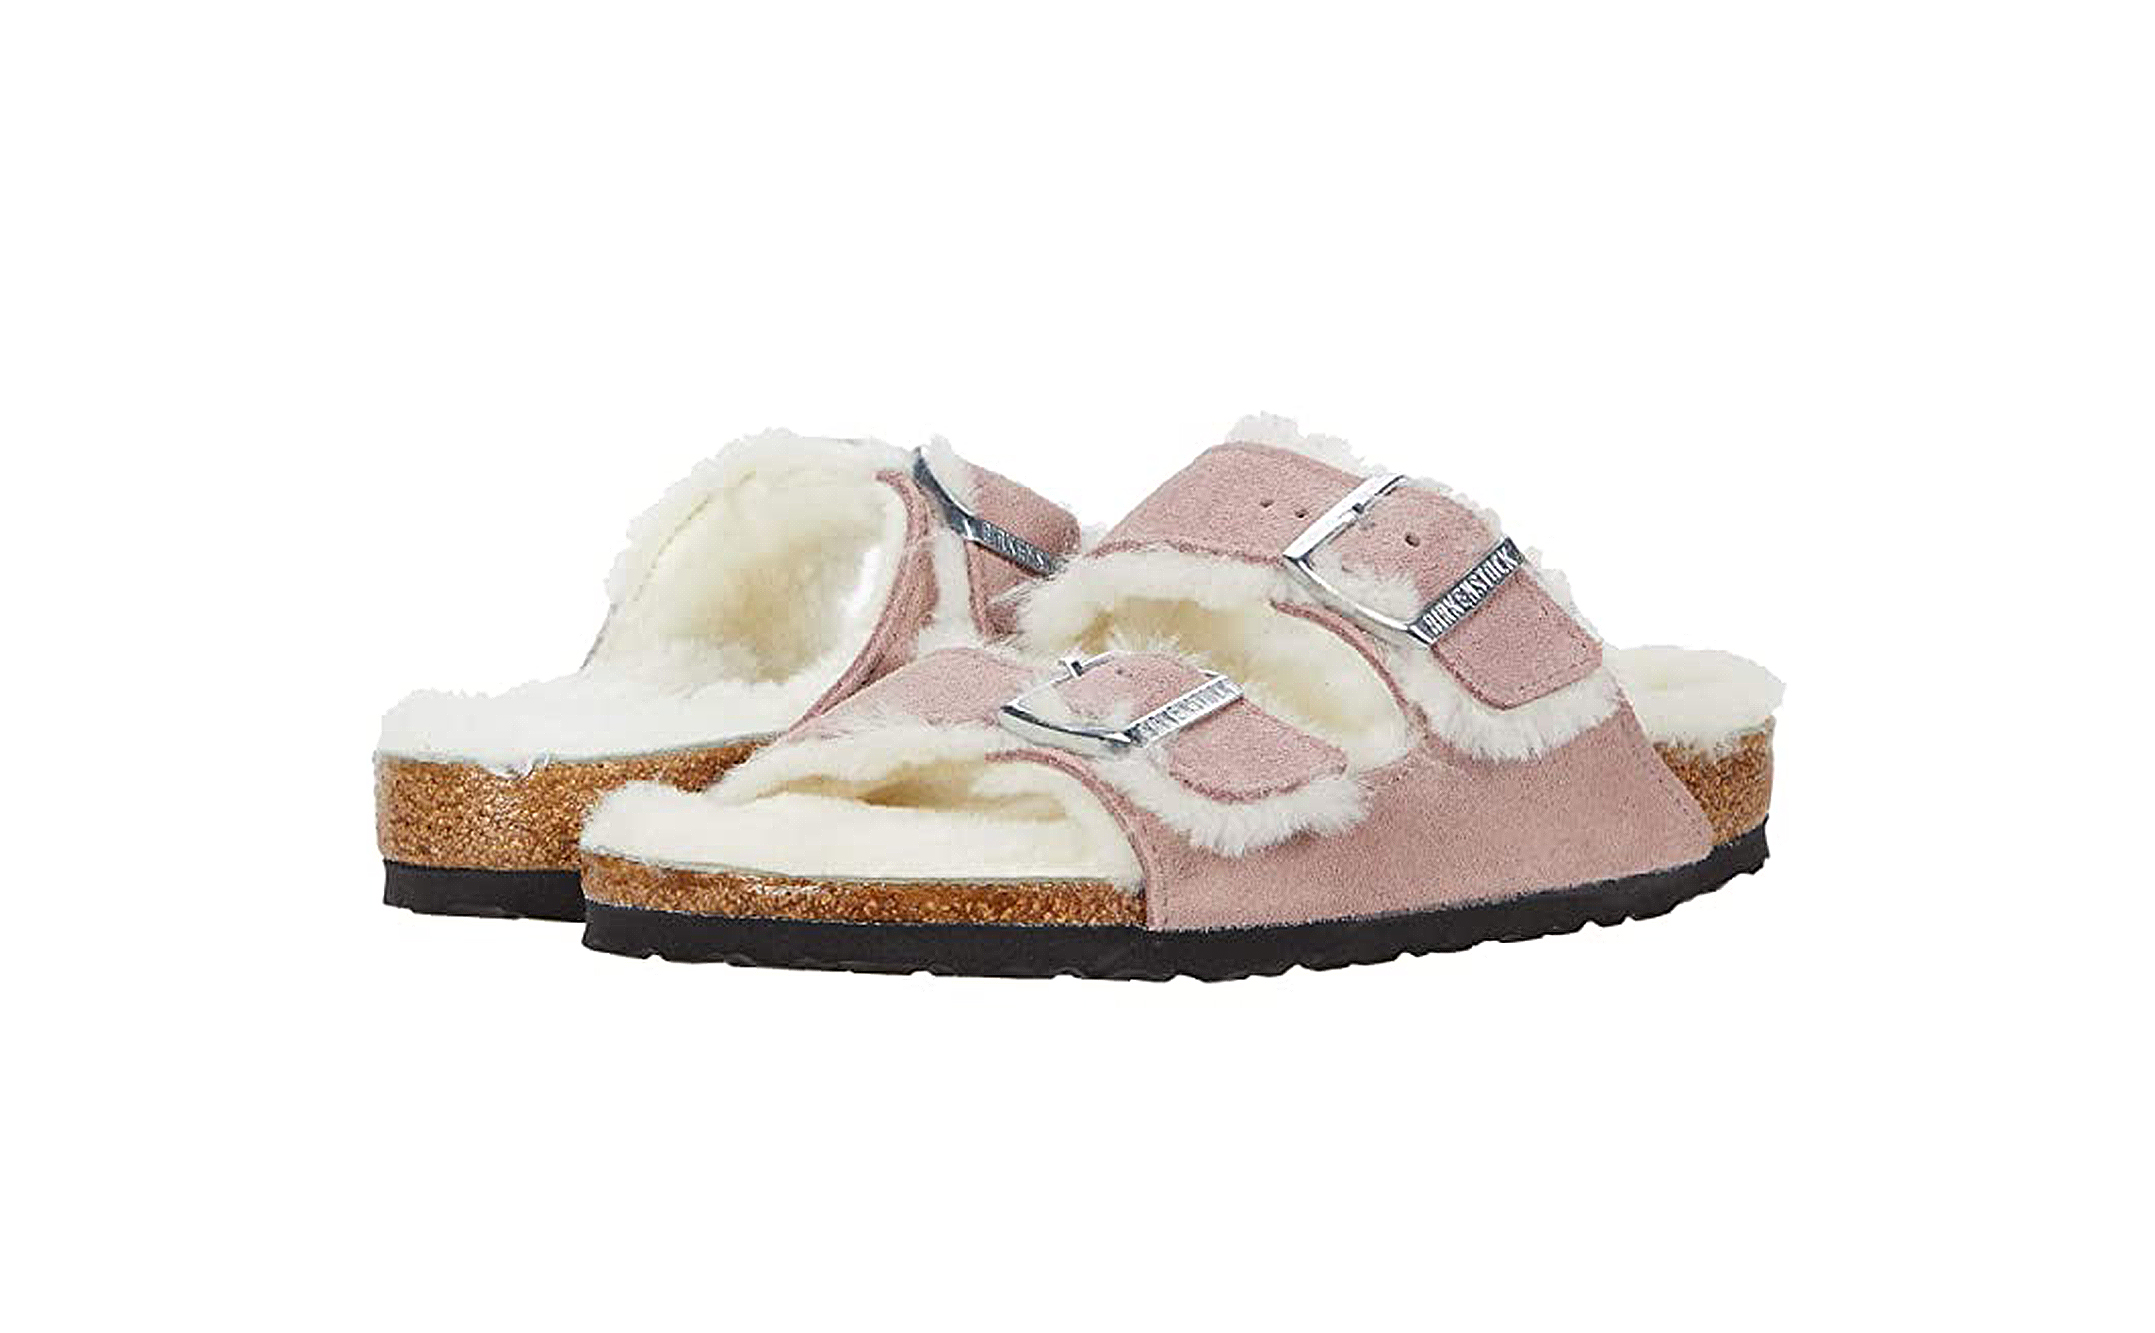 Birkenstock Shearling-Lined Sandals Are So Cozy and Comfortable